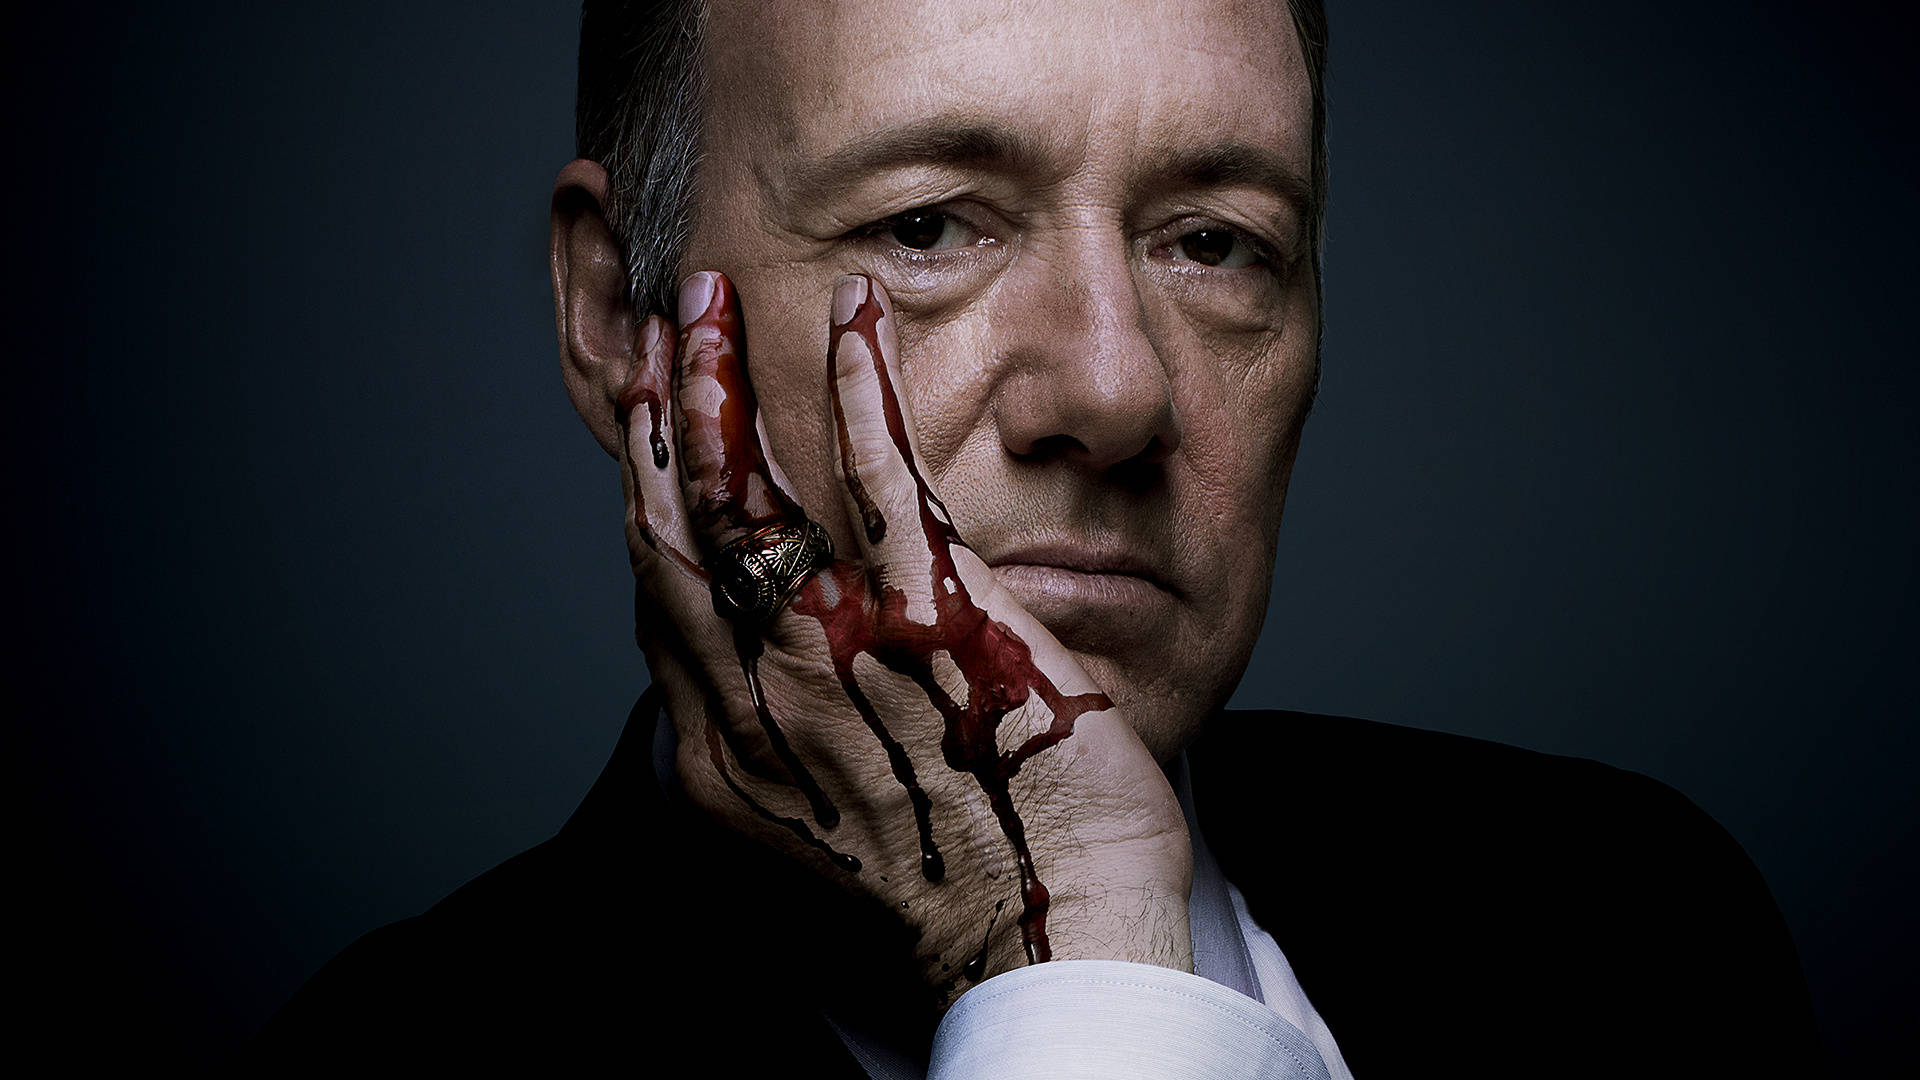 Hollywood Actor Kevin Spacey in a Serious Look Wallpaper